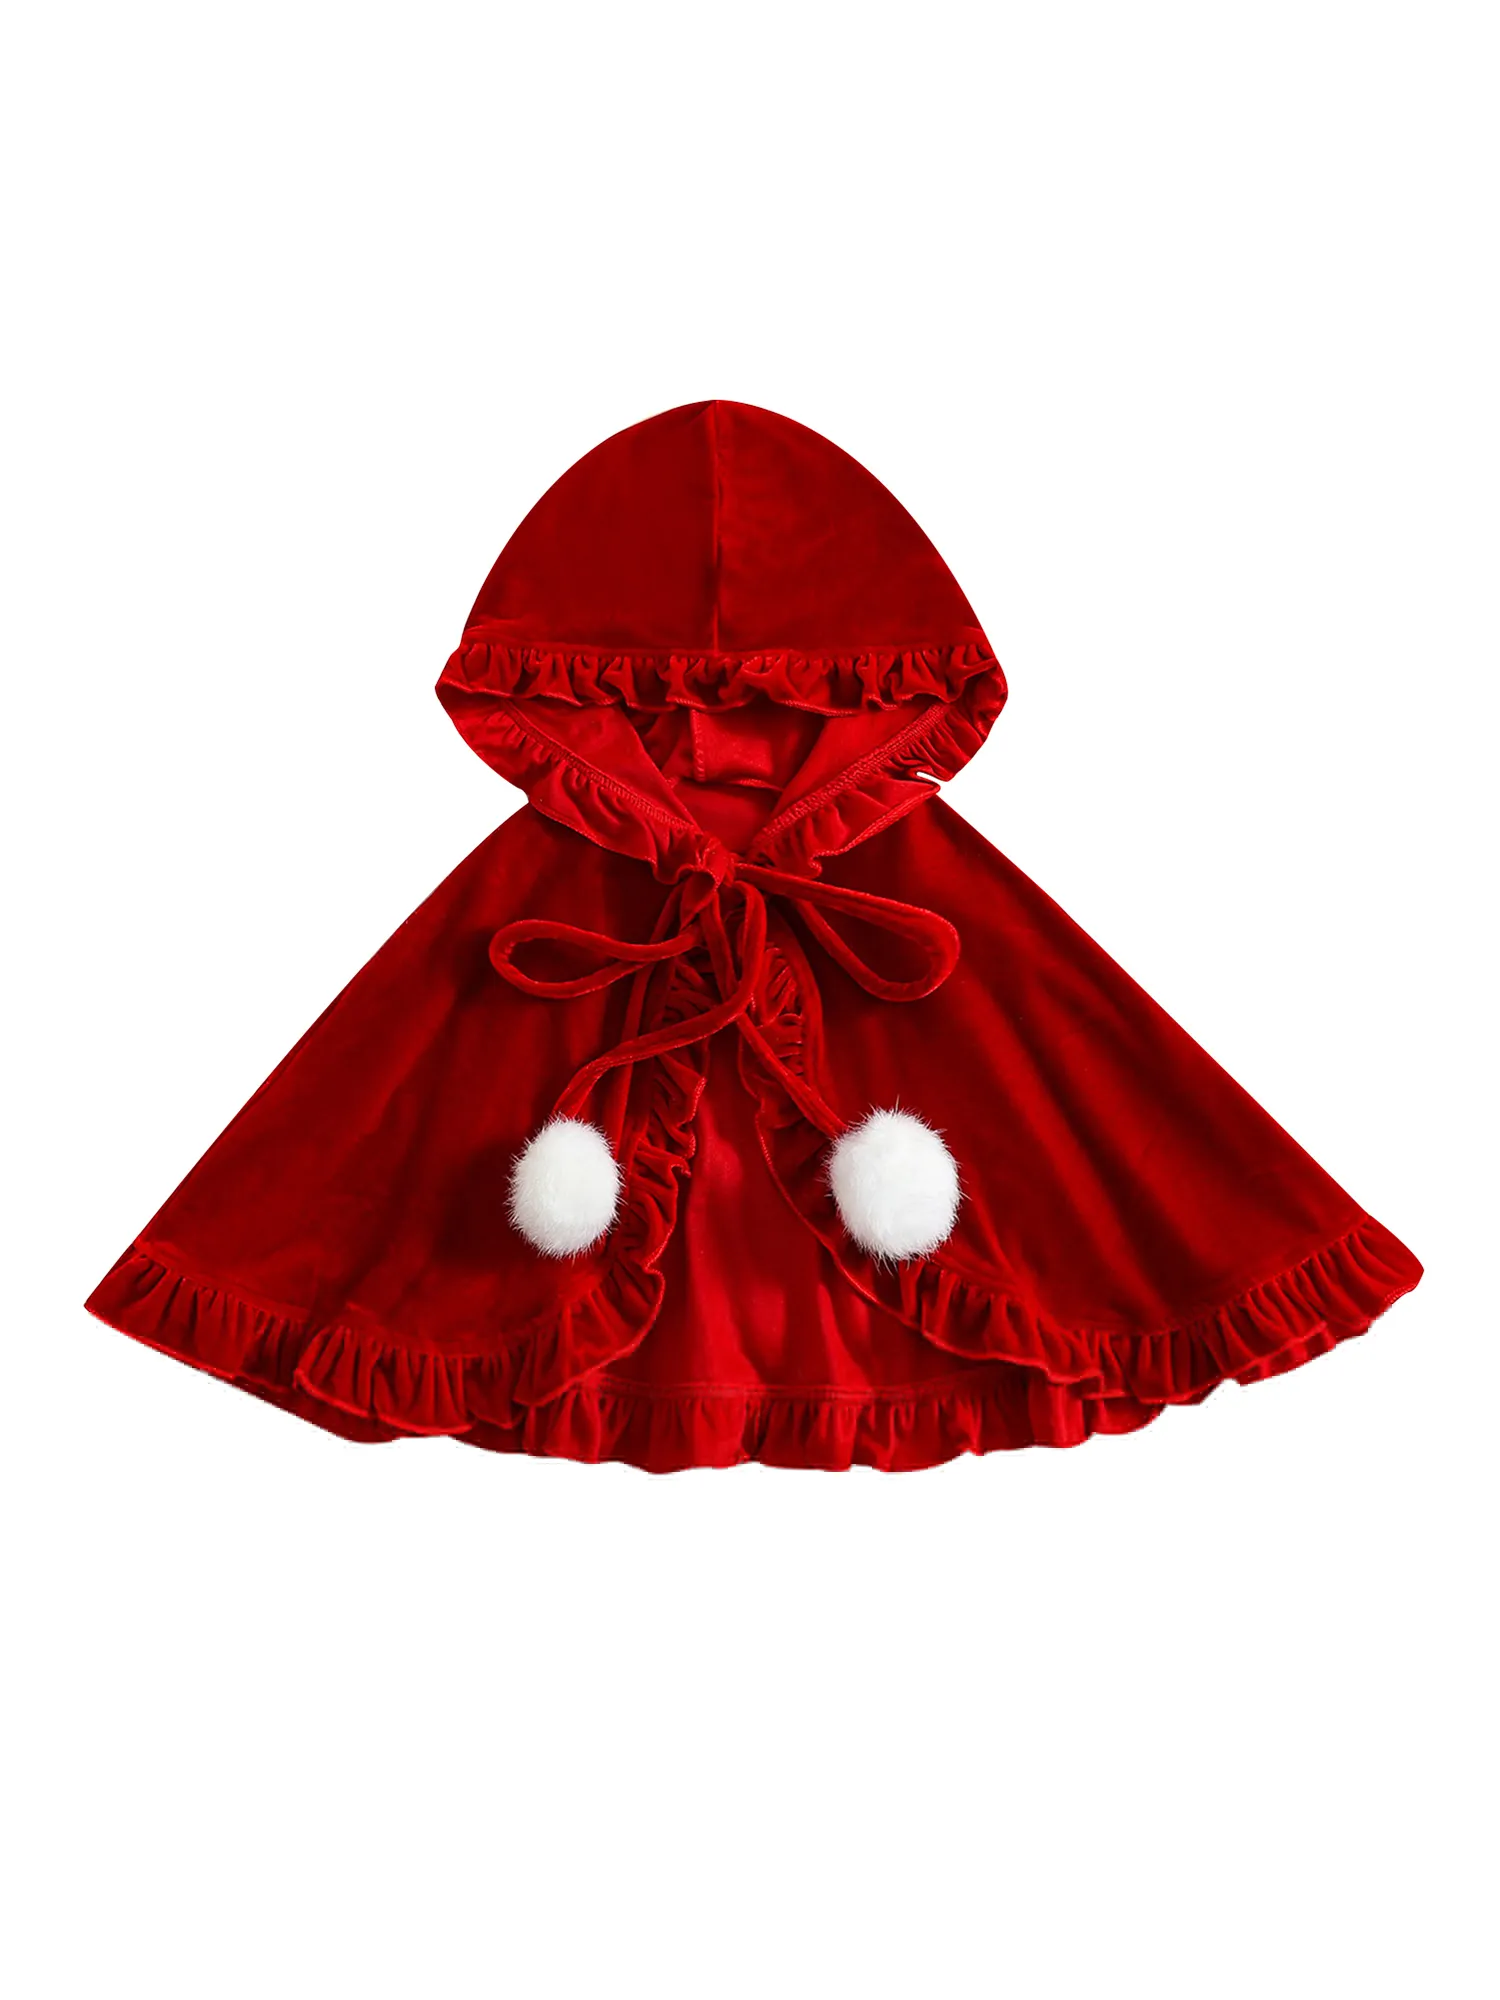 Girl's Dresses Kids Girls Plysch Cloak Soft Hooded Nacing Frills Cape With Balls for Christmas Party 221110